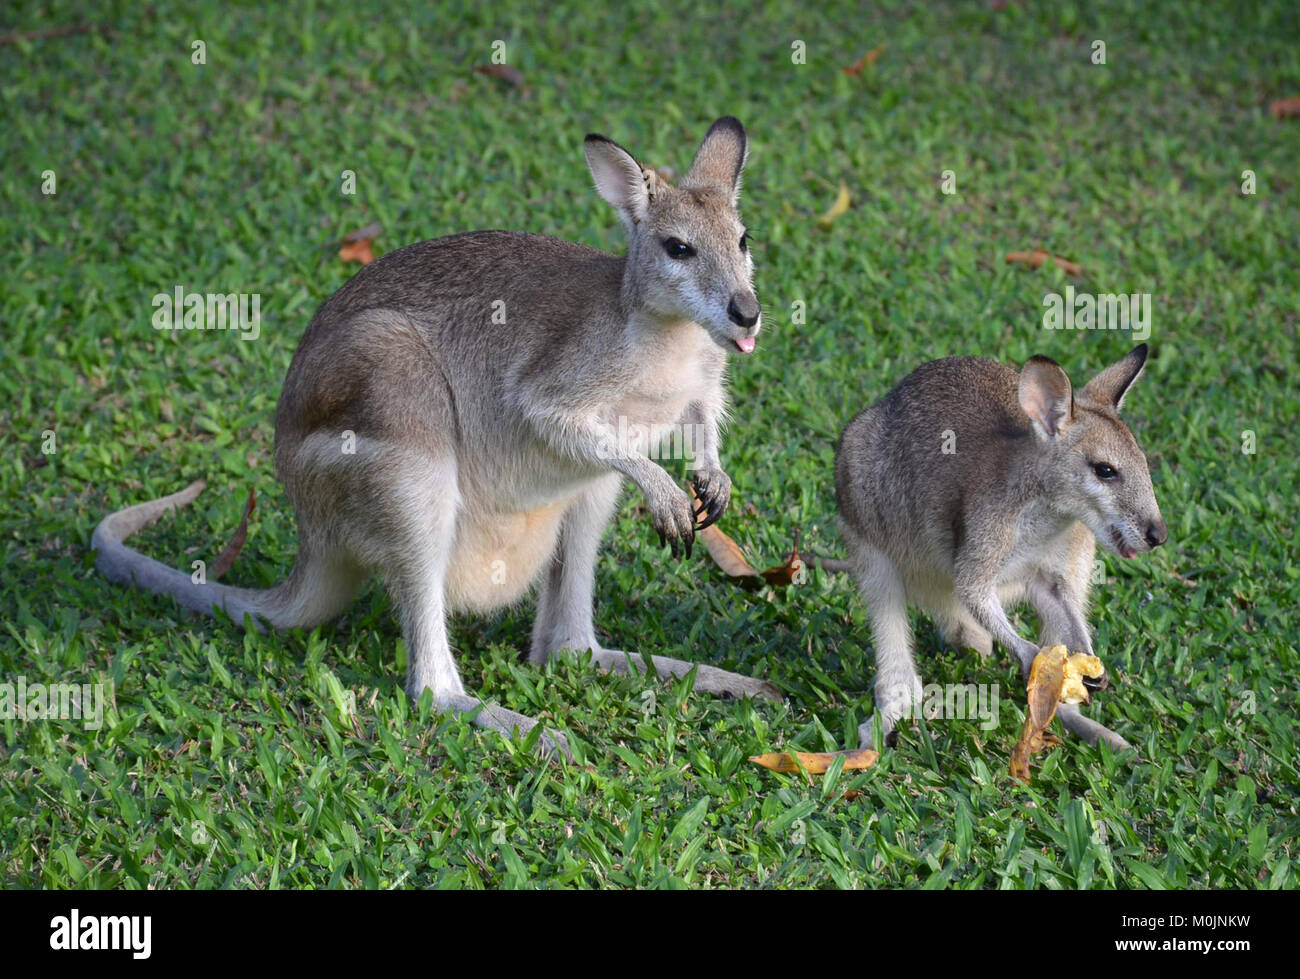 Agile Wallabies. Northern Australia. Pouched Megapodes (Giant Foot) Stock Photo